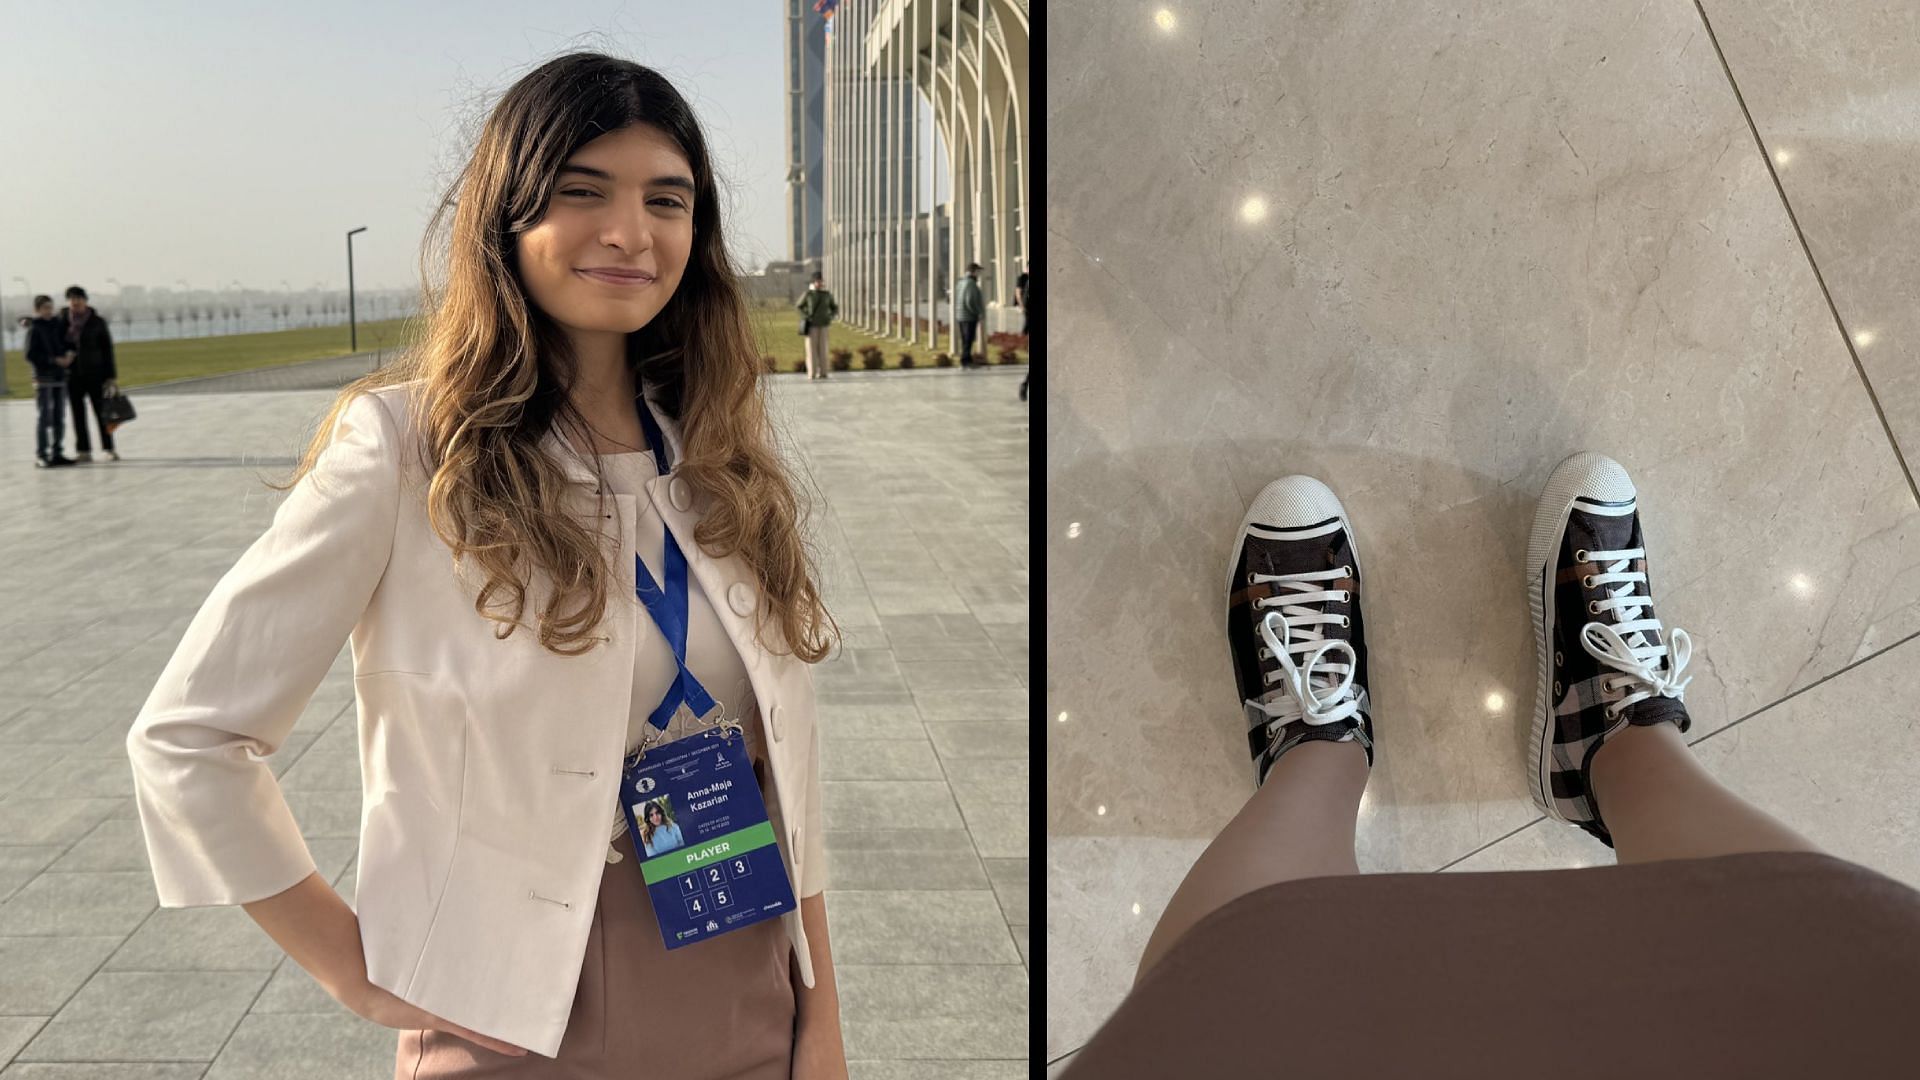 Dutch chess player had to change her shoes after FIDE penalized her for wearing &quot;sports&quot; sneakers (Image via Anna-Maja Kazarian/X)